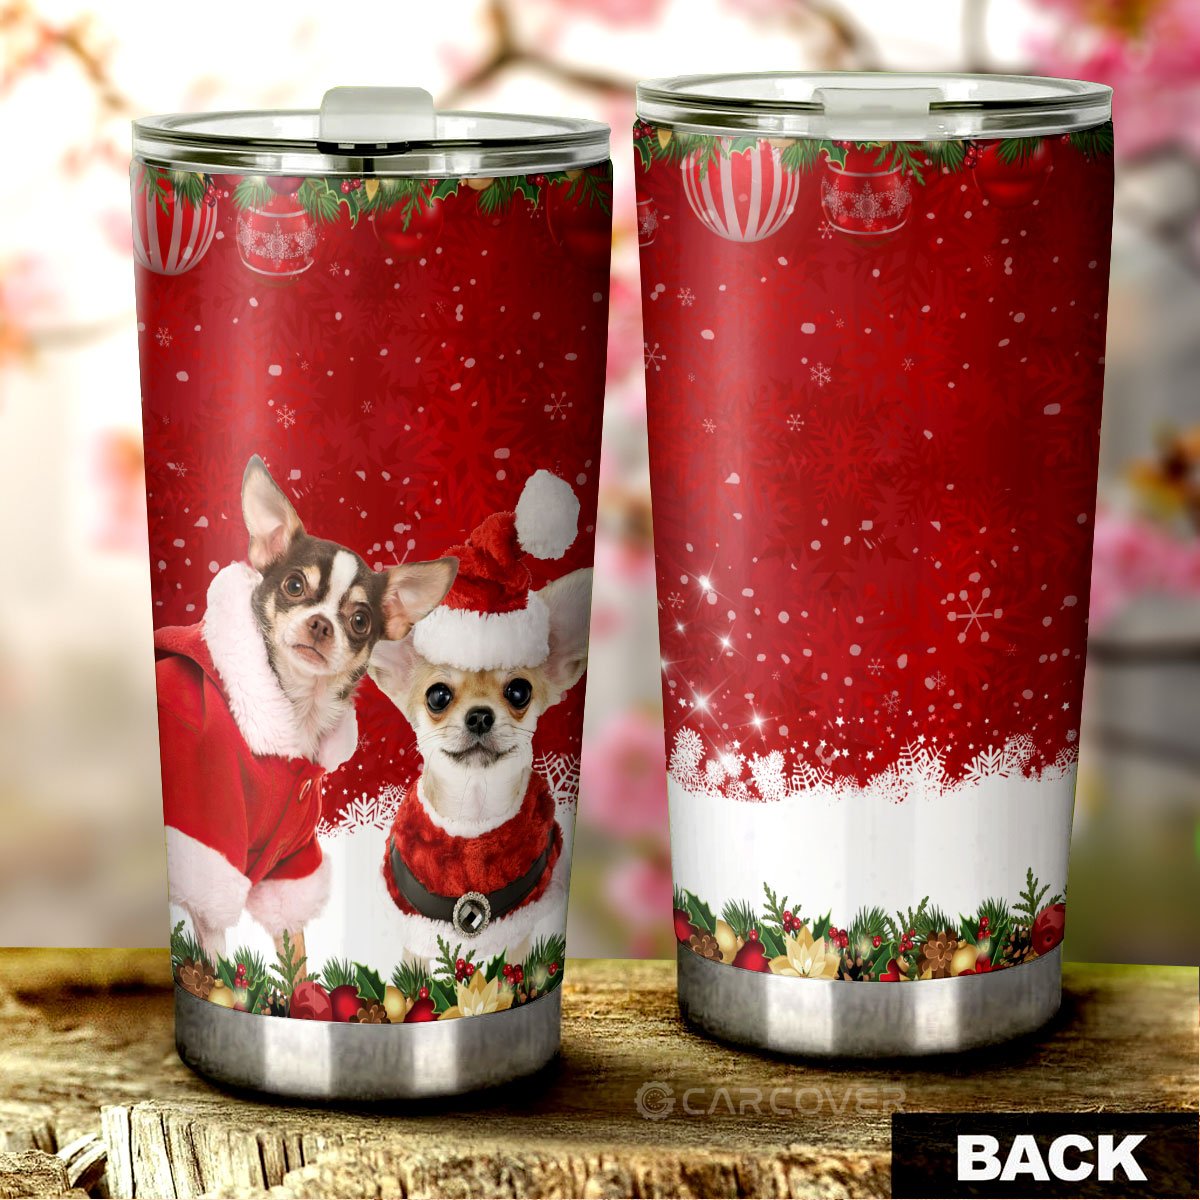 Chihuahuas Christmas Tumbler Cup Custom Car Accessories For Dog Lovers - Gearcarcover - 4